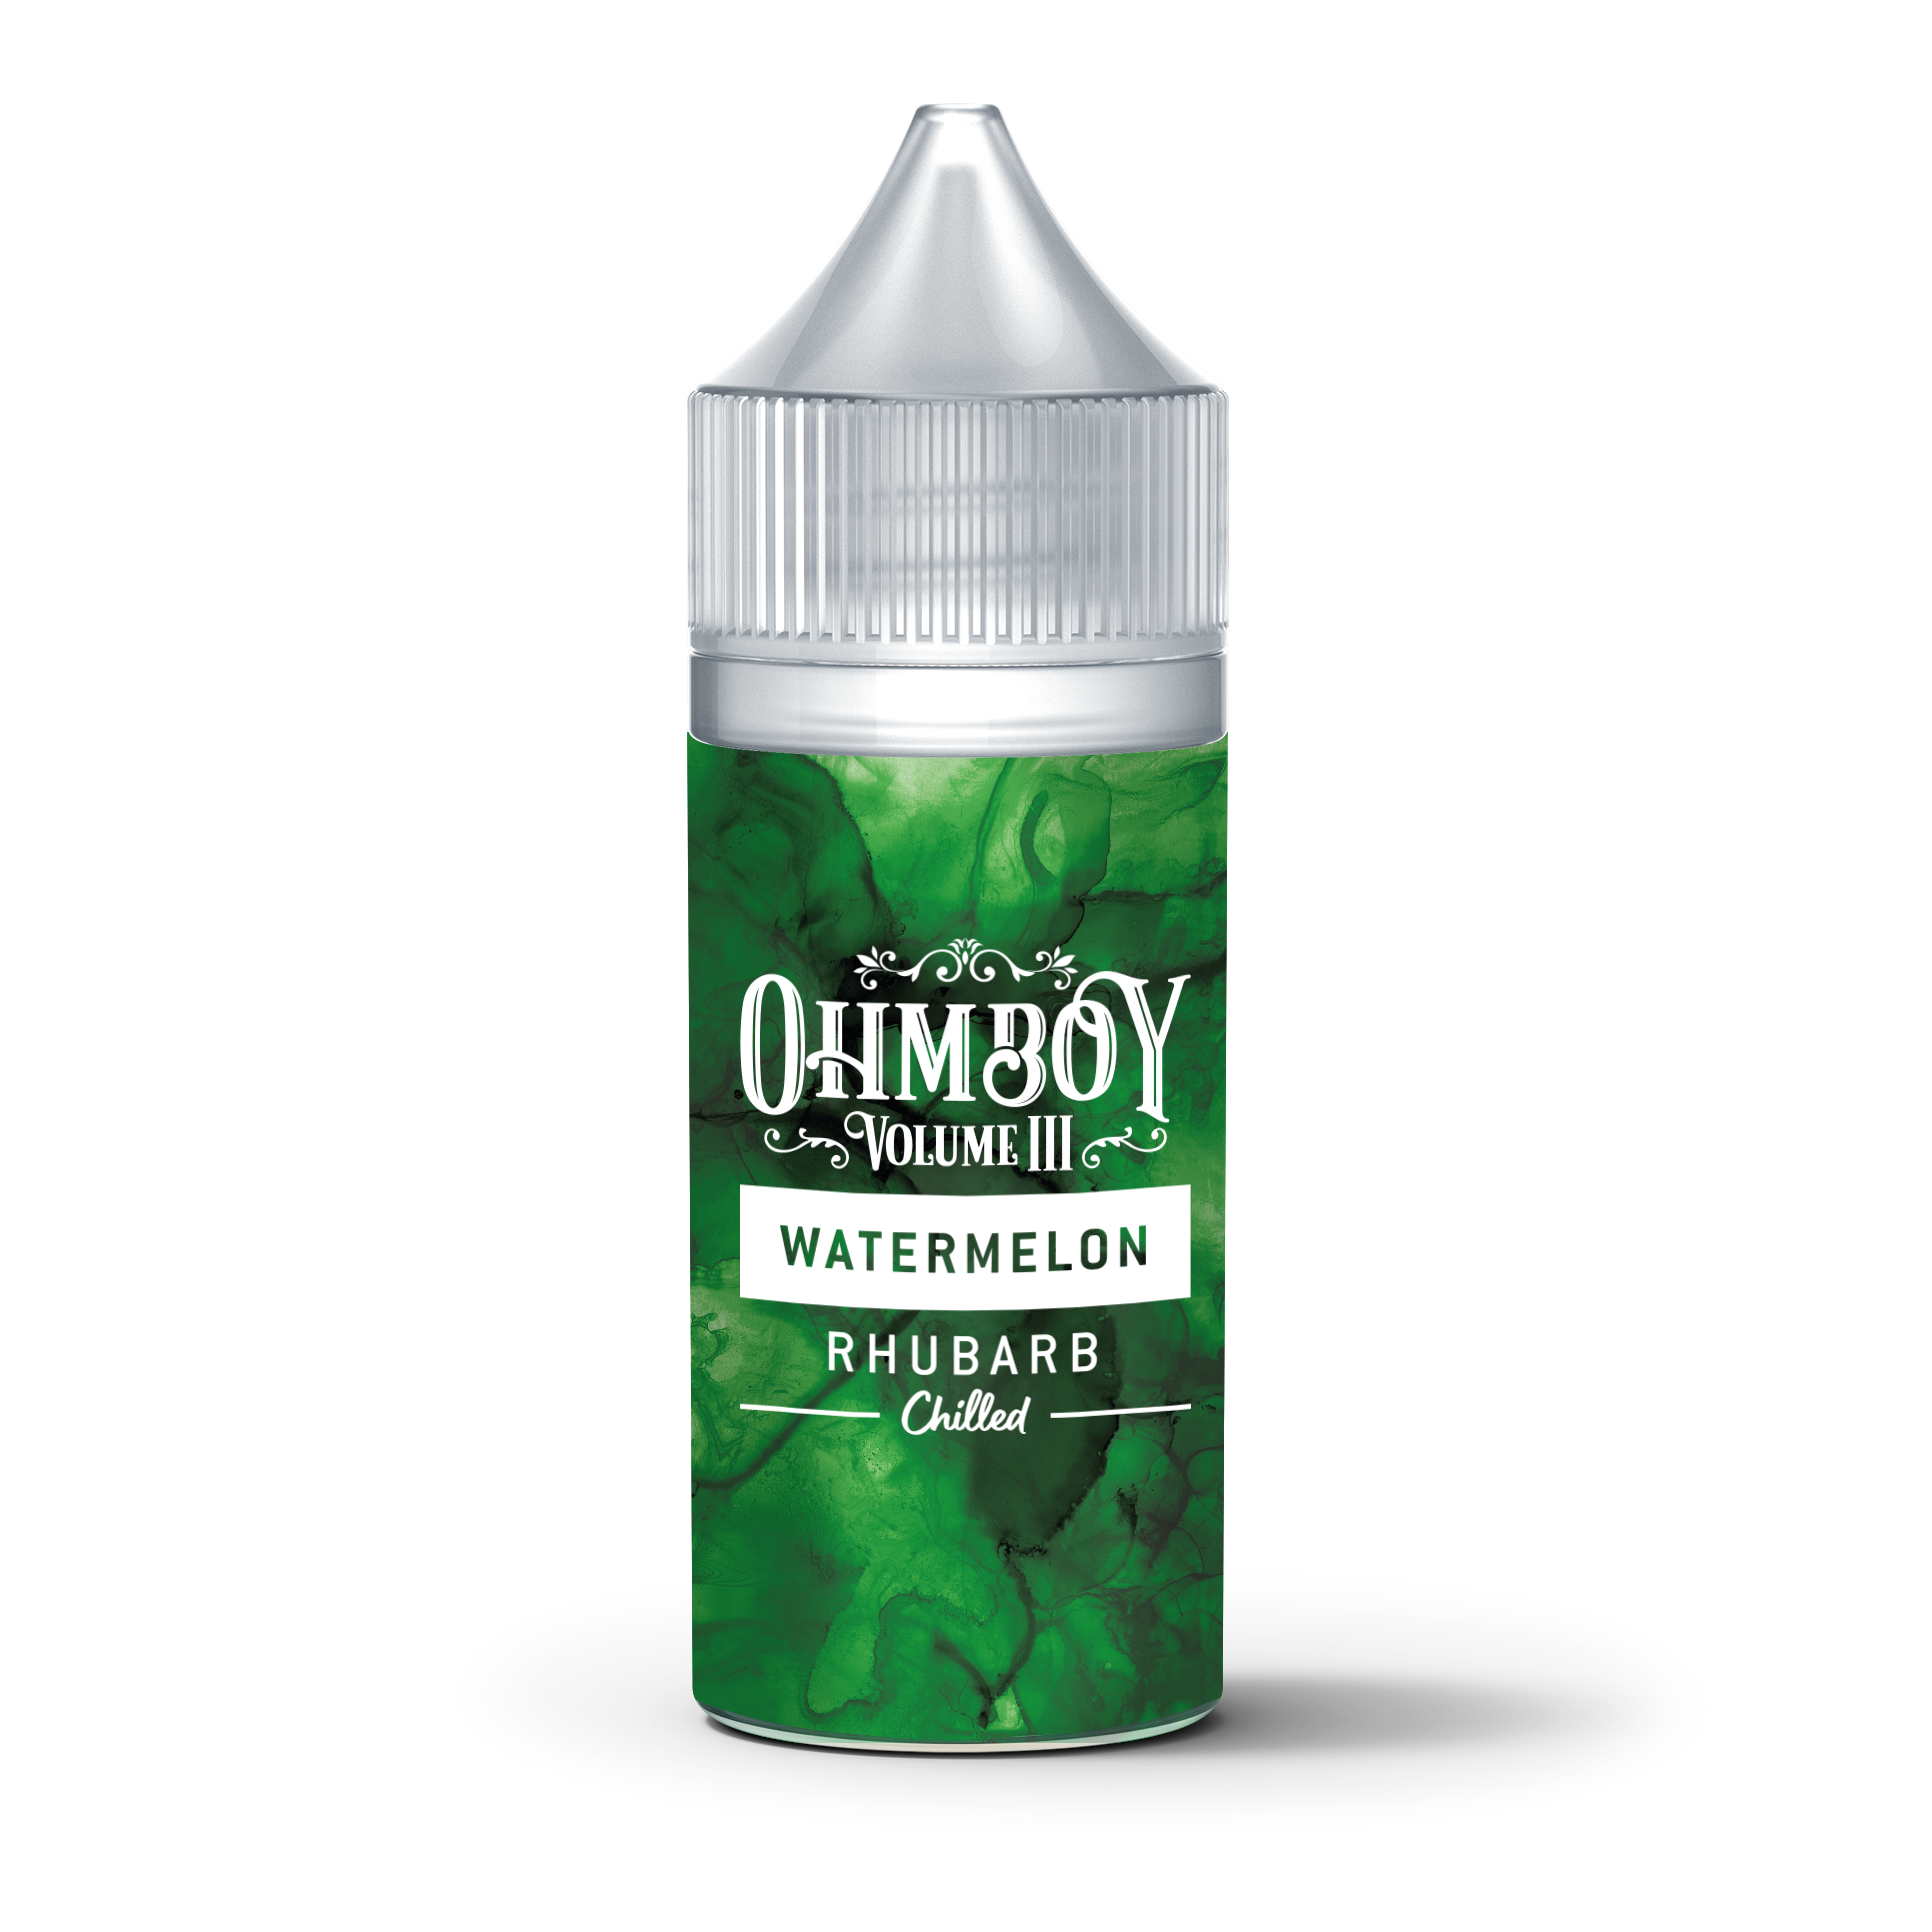 Watermelon Rhubarb Chilled Flavour Concentrate by Ohm Boy